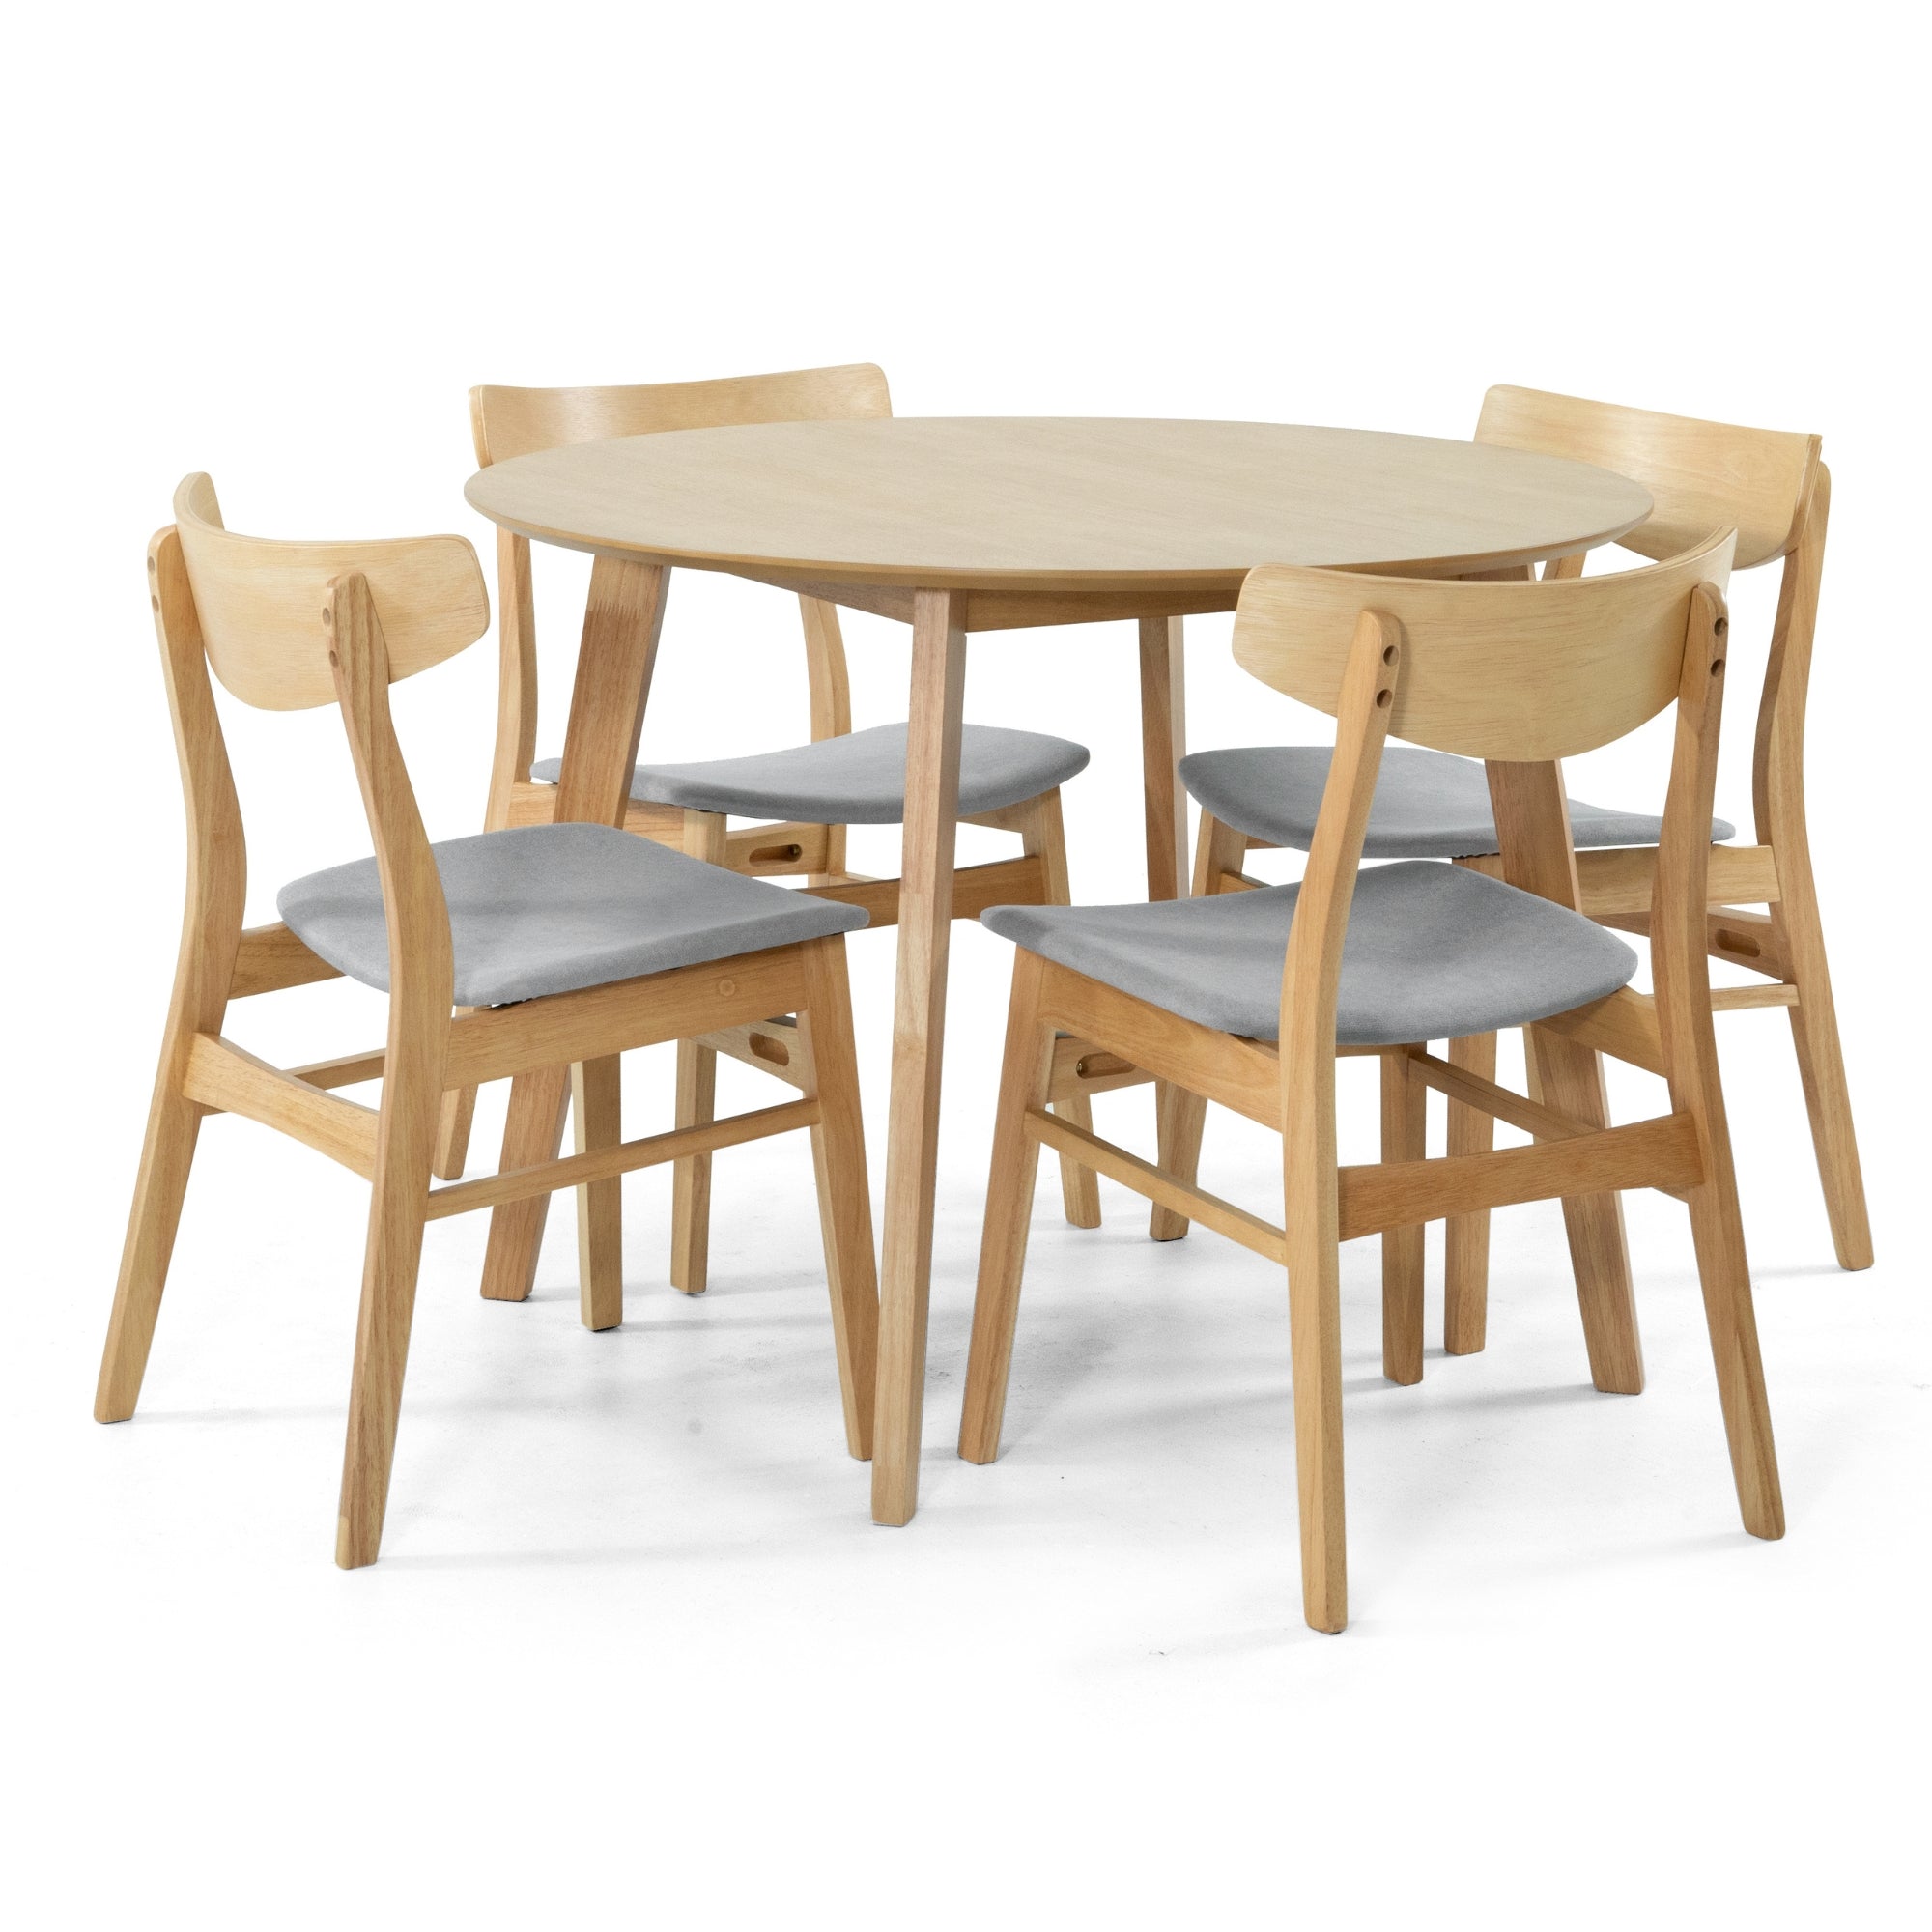 Round MDF Dining Table & 4 Fabric Chairs Set, Scandinavian